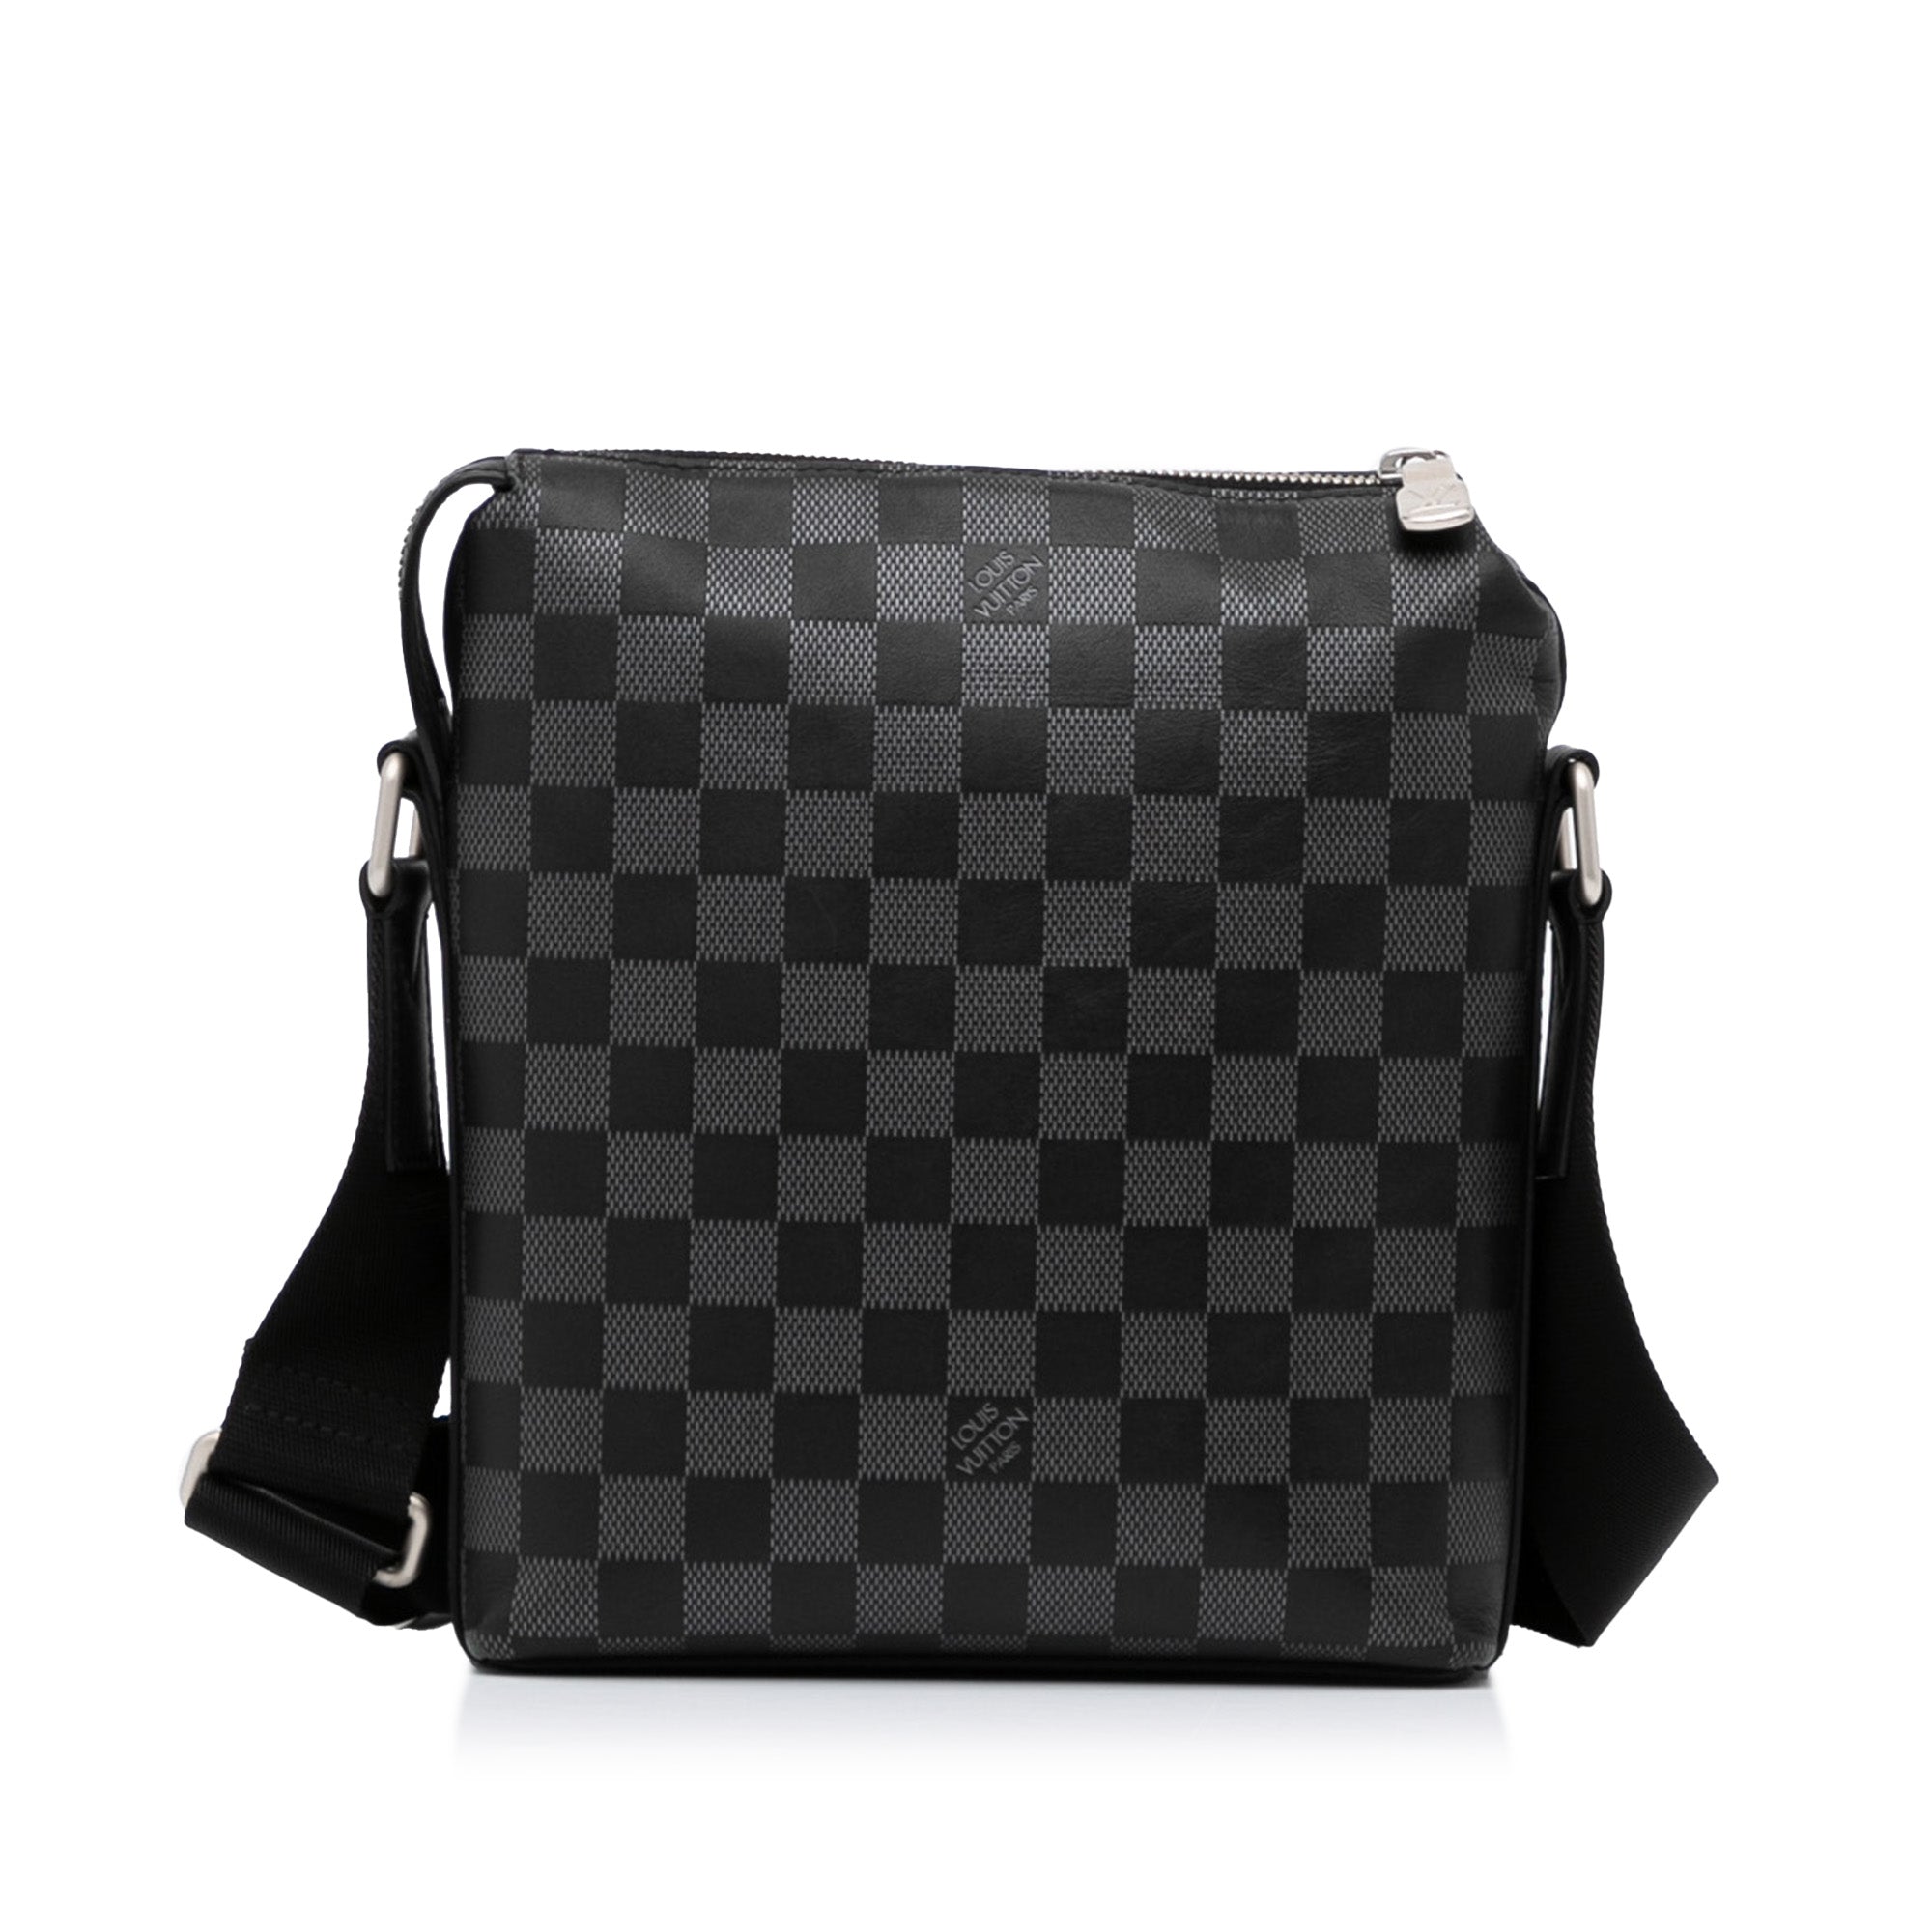 Louis Vuitton Discovery Bb Damier Infini Messenger Crossbody Bag in Black | Lord & Taylor